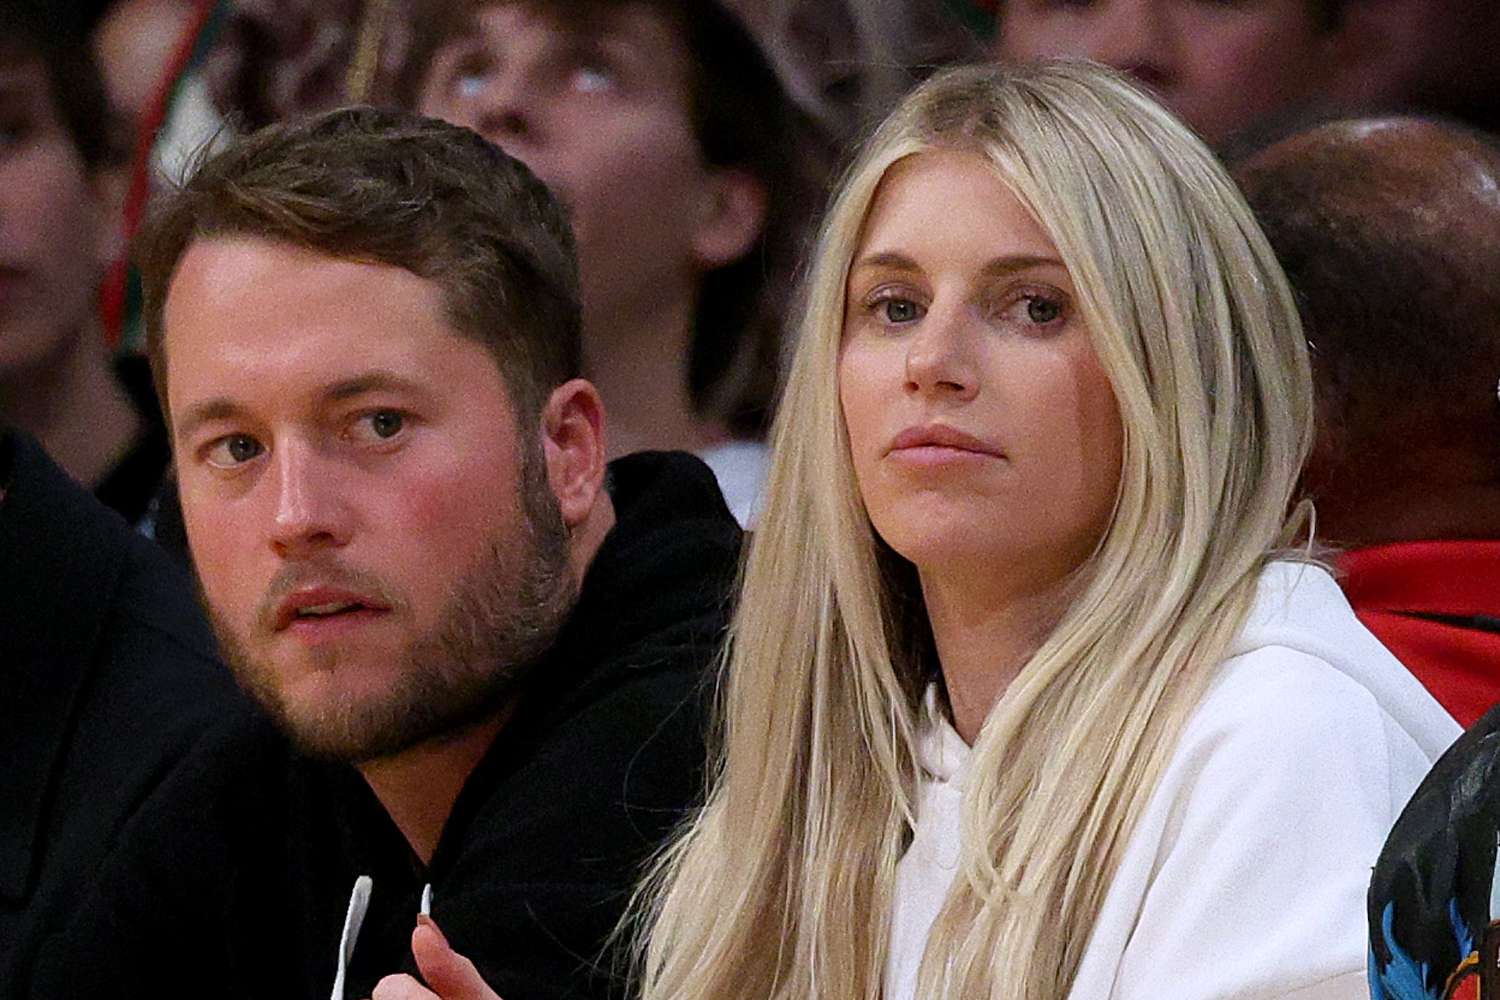 Matt Stafford’s Wife Criticizes Blueface’s Inappropriate Behavior At Rams Game